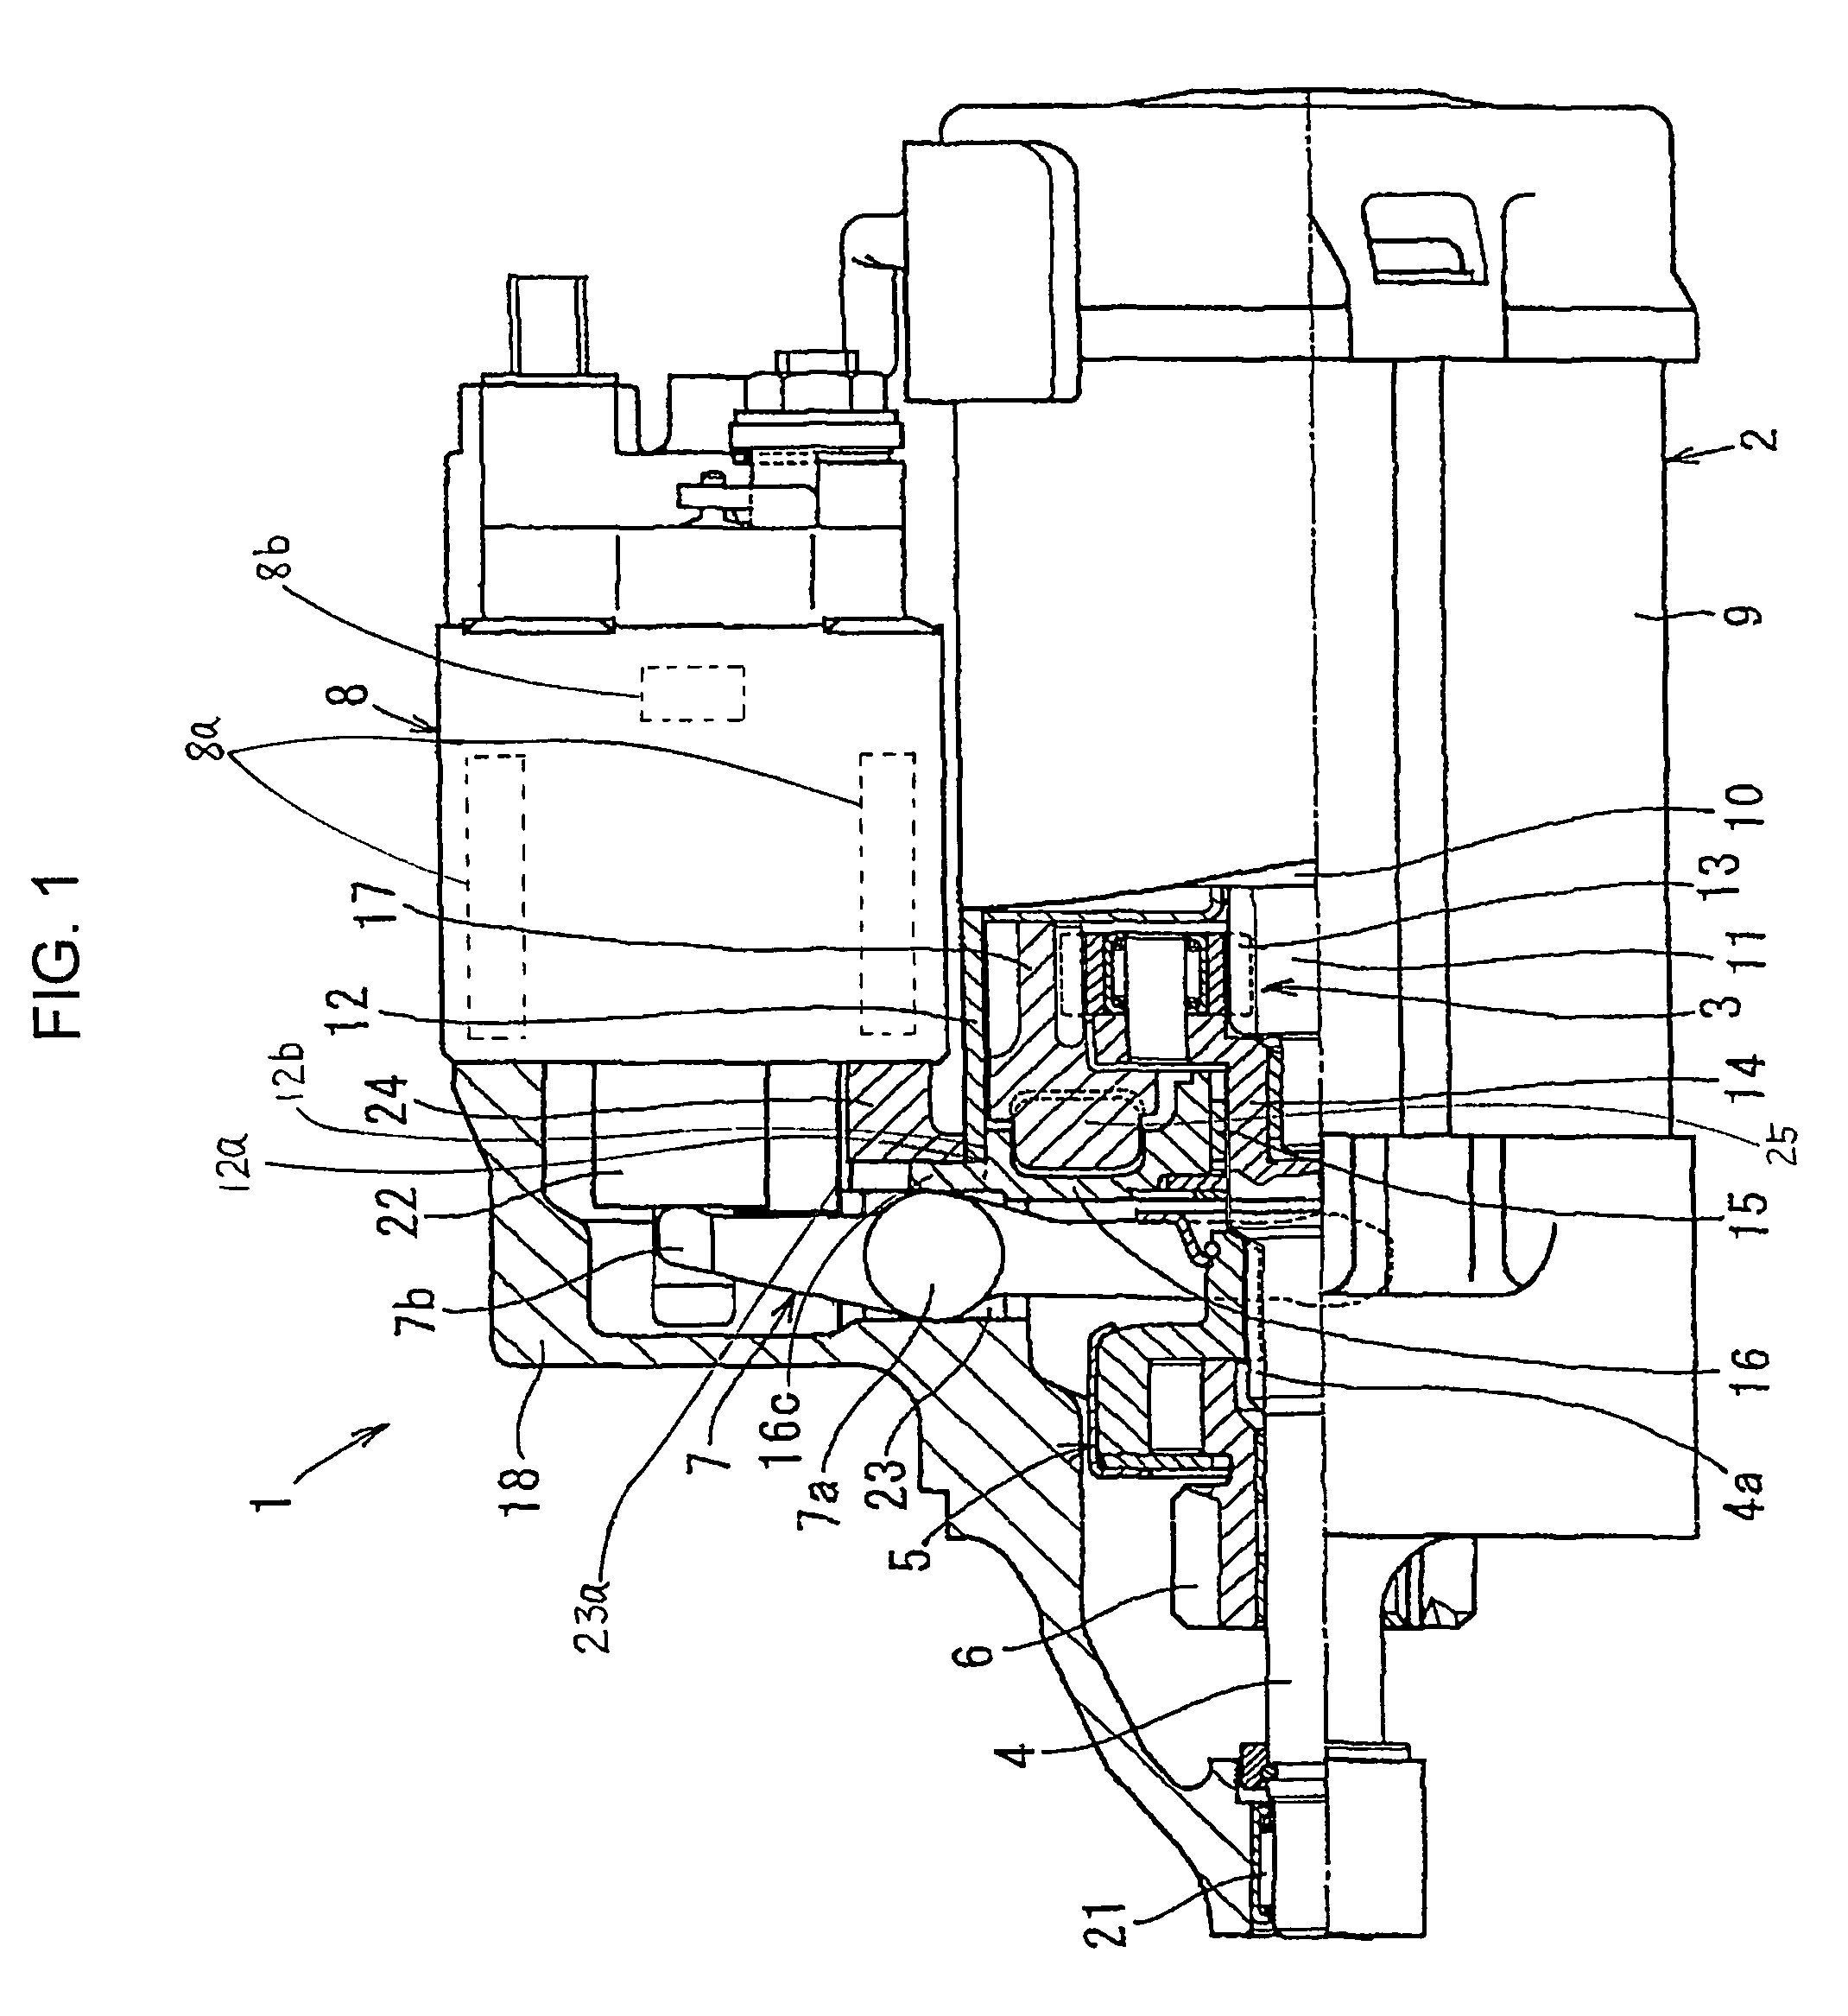 Starter with reliable fulcrum supporter supporting fulcrum portion of shift lever